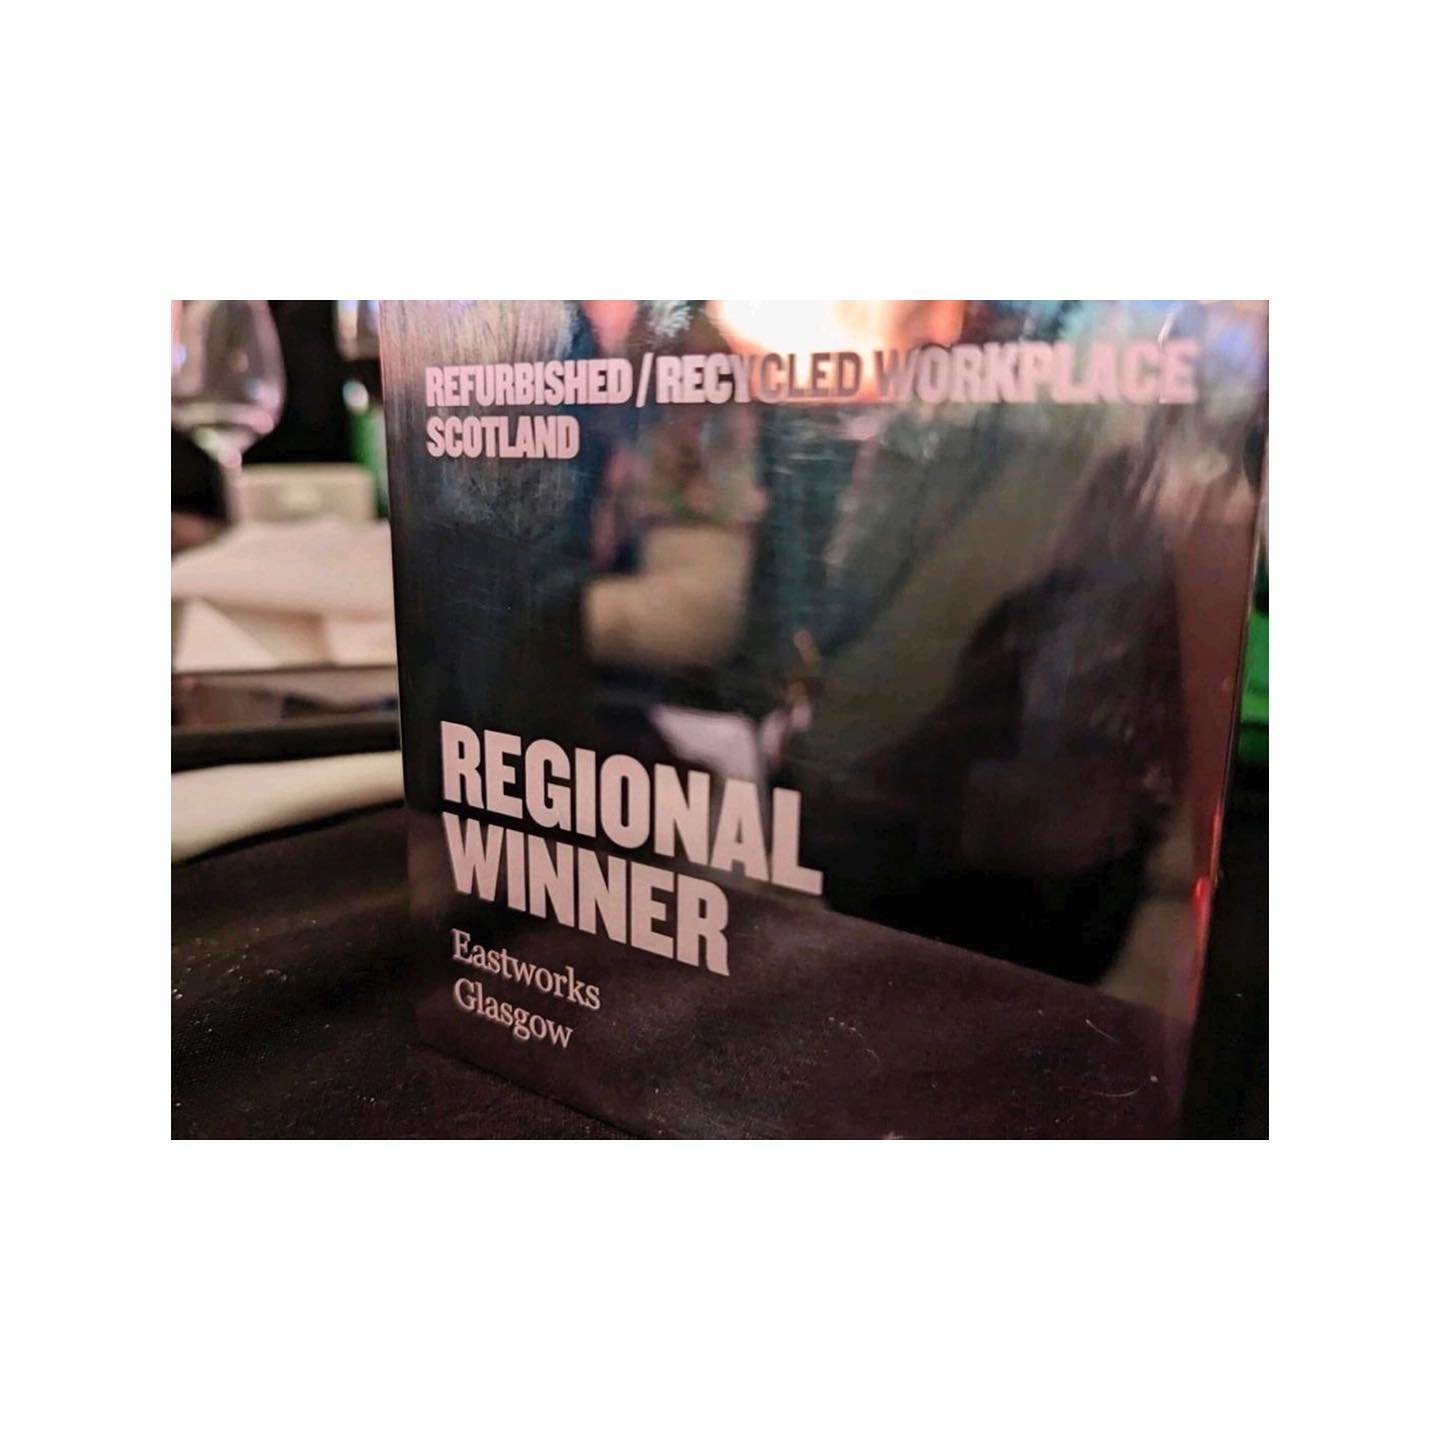 We were delighted to win the British Council for Offices Regional Award for Refurbished/Recycled Workplace in Scotland this year for Eastworks!
&nbsp;
The judges were particularly impressed with the community engagement and regeneration that underpin